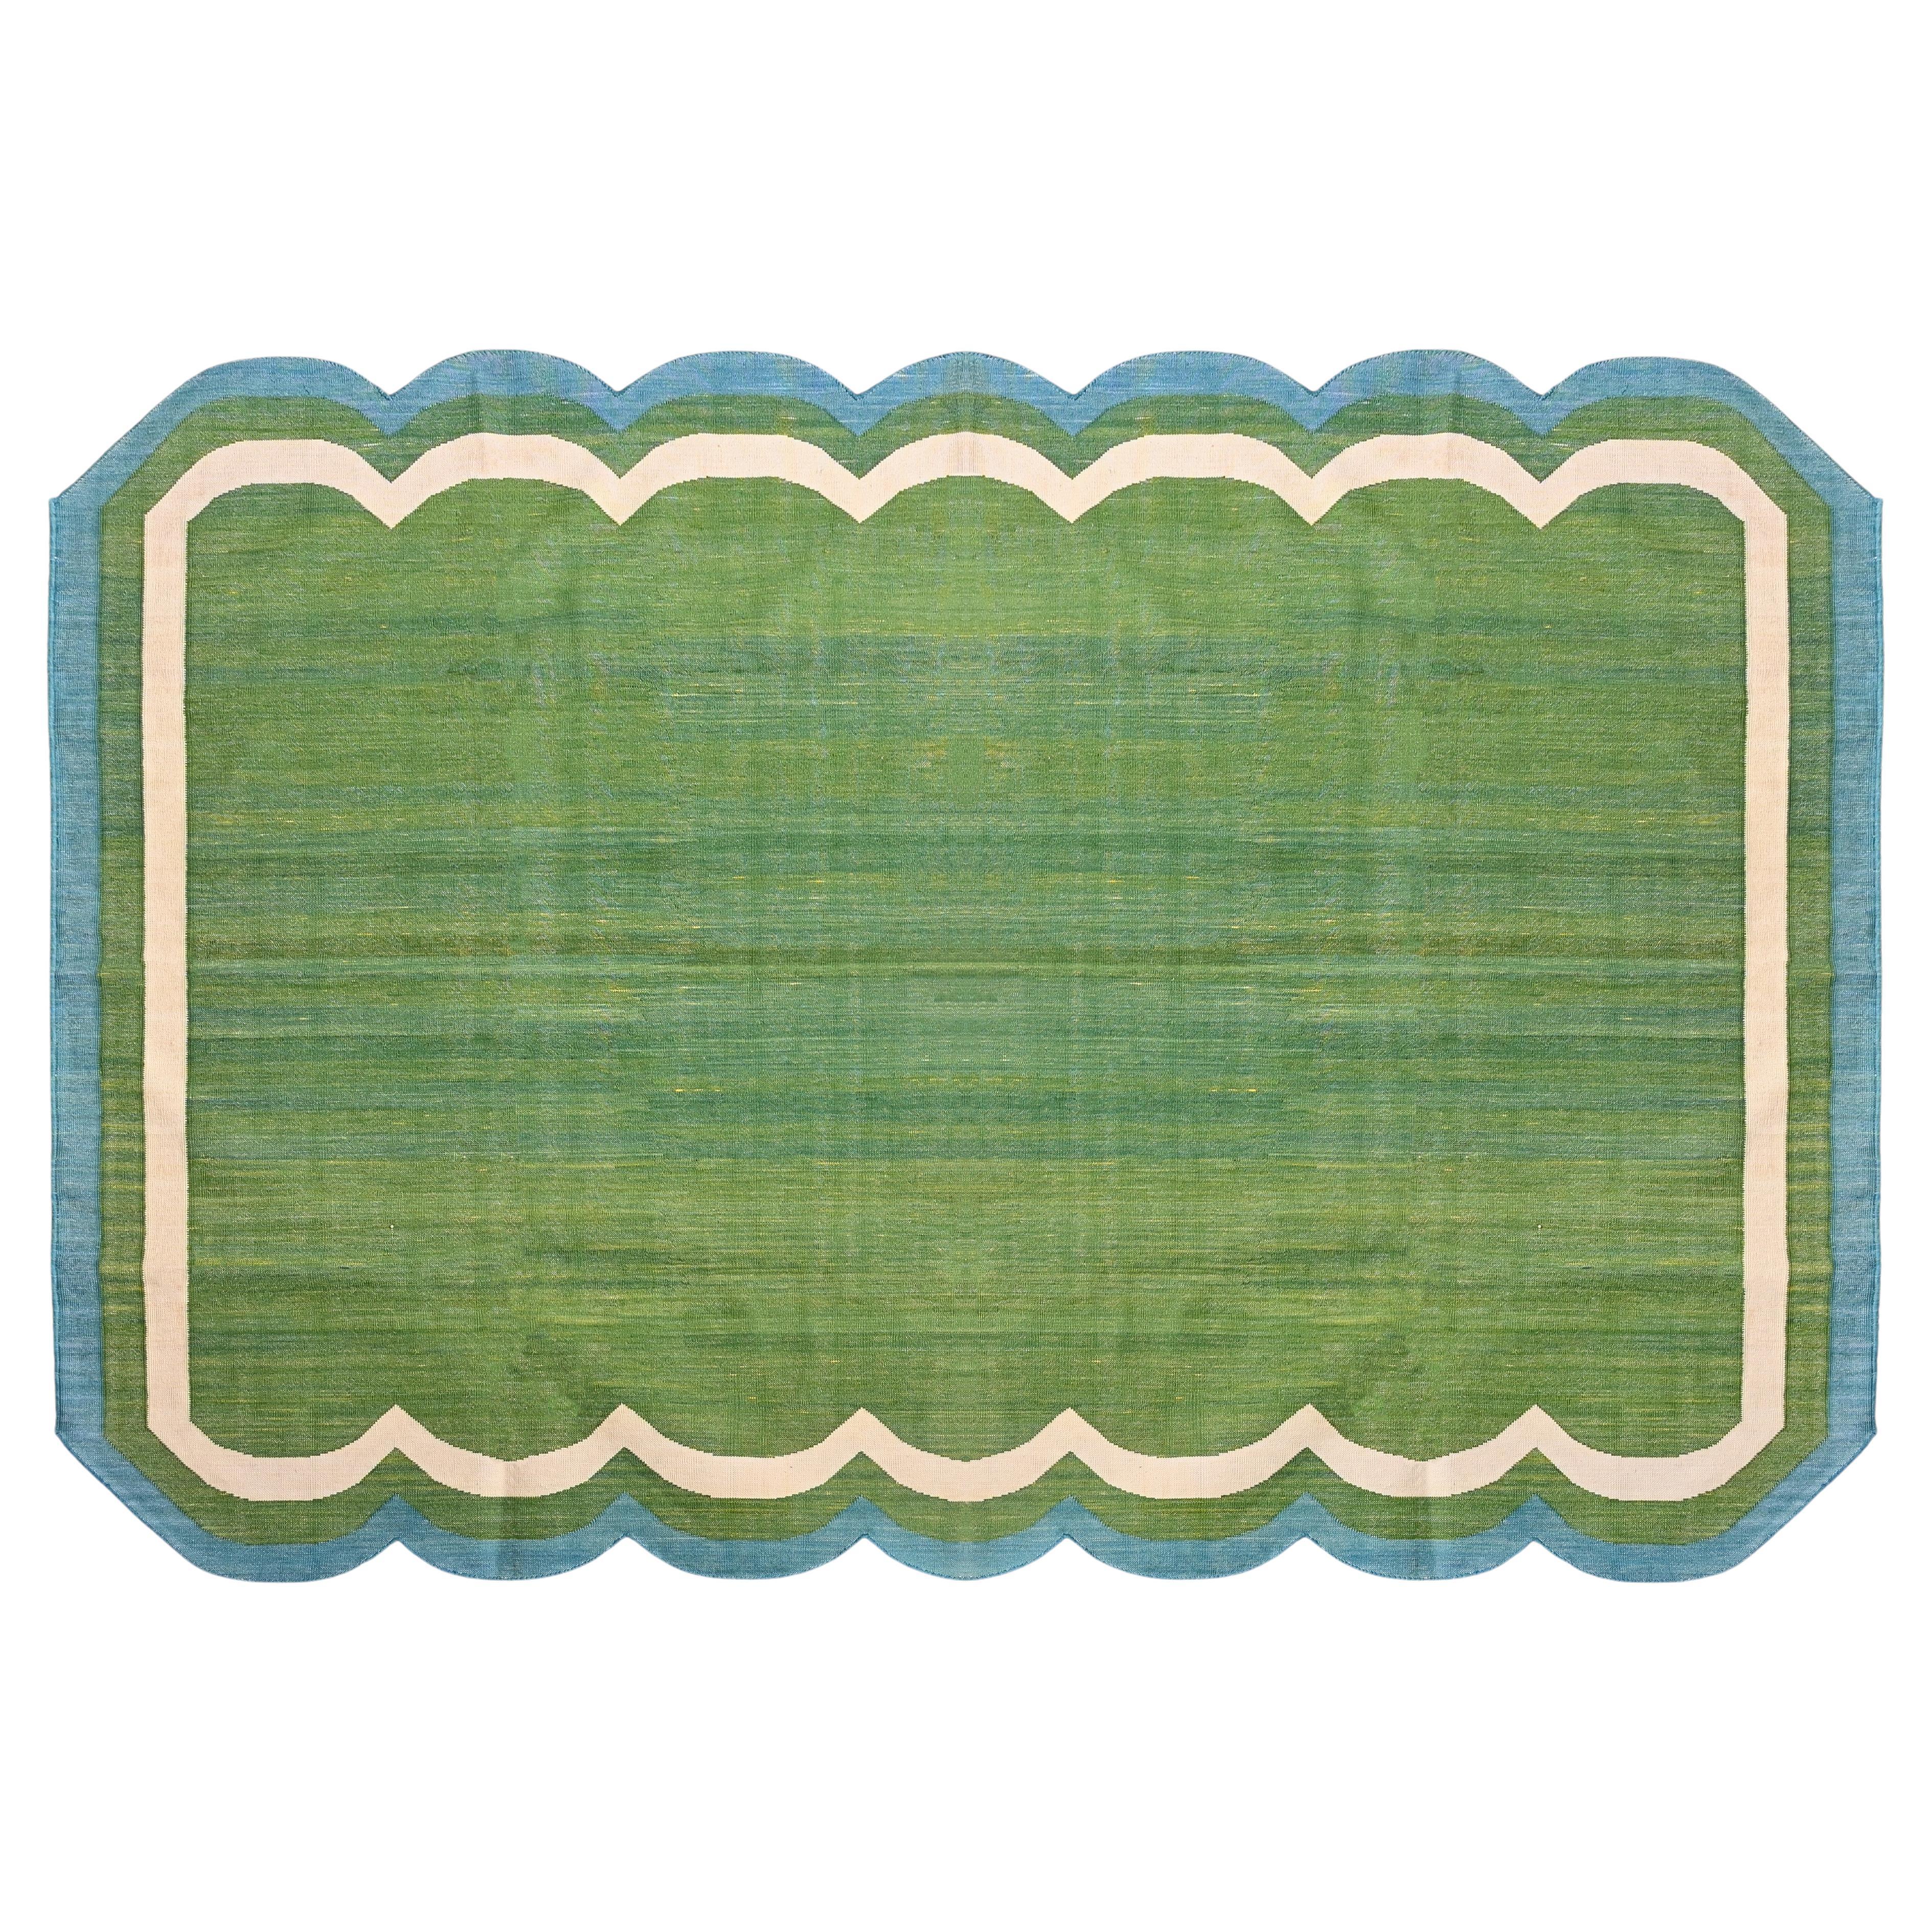 Handmade Cotton Area Flat Weave Rug, 6x9 Green And Blue Scalloped Kilim Dhurrie For Sale